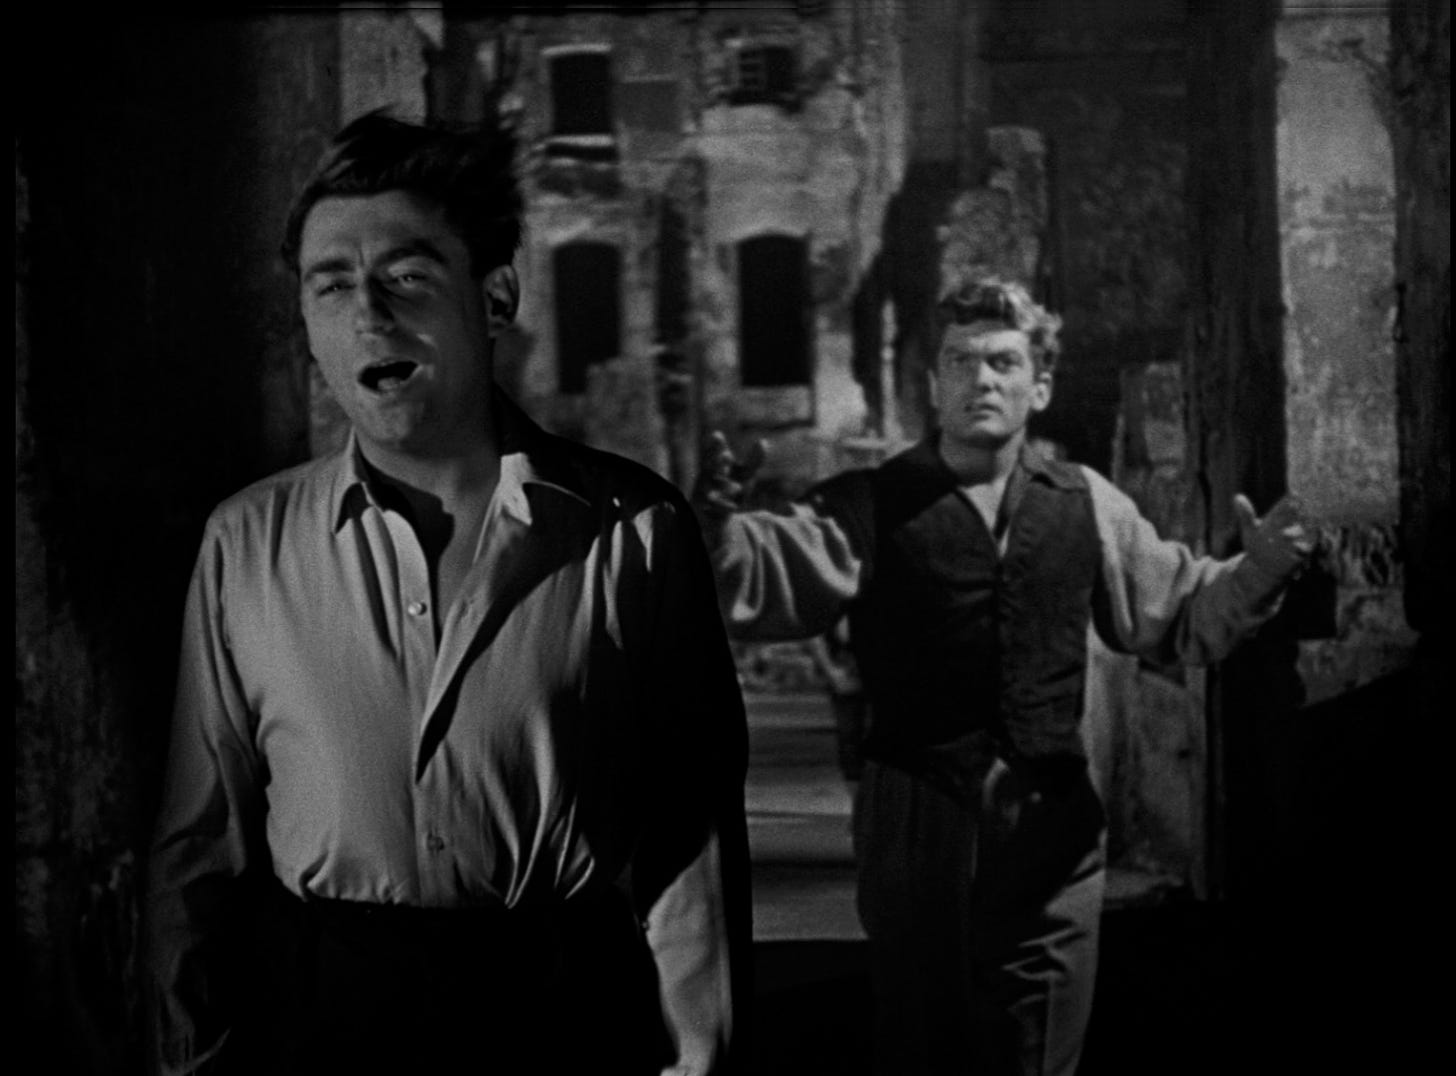 Black and white image. Two men walking with wind blowing in their faces. The front one is making a kind of wry comment with mouth wide open and wearing a shirt tucked into high-waisted trousers, 50's style outfits. The film was made in 1950. The man behind is tall, handsome, frightened looking and throwing both hands up by his sides, as if confused and grasping for meaning. They are passing through an old Grecian looking corridor, with ramshackle houses with black, paneless windows and ivy creeping up and down.